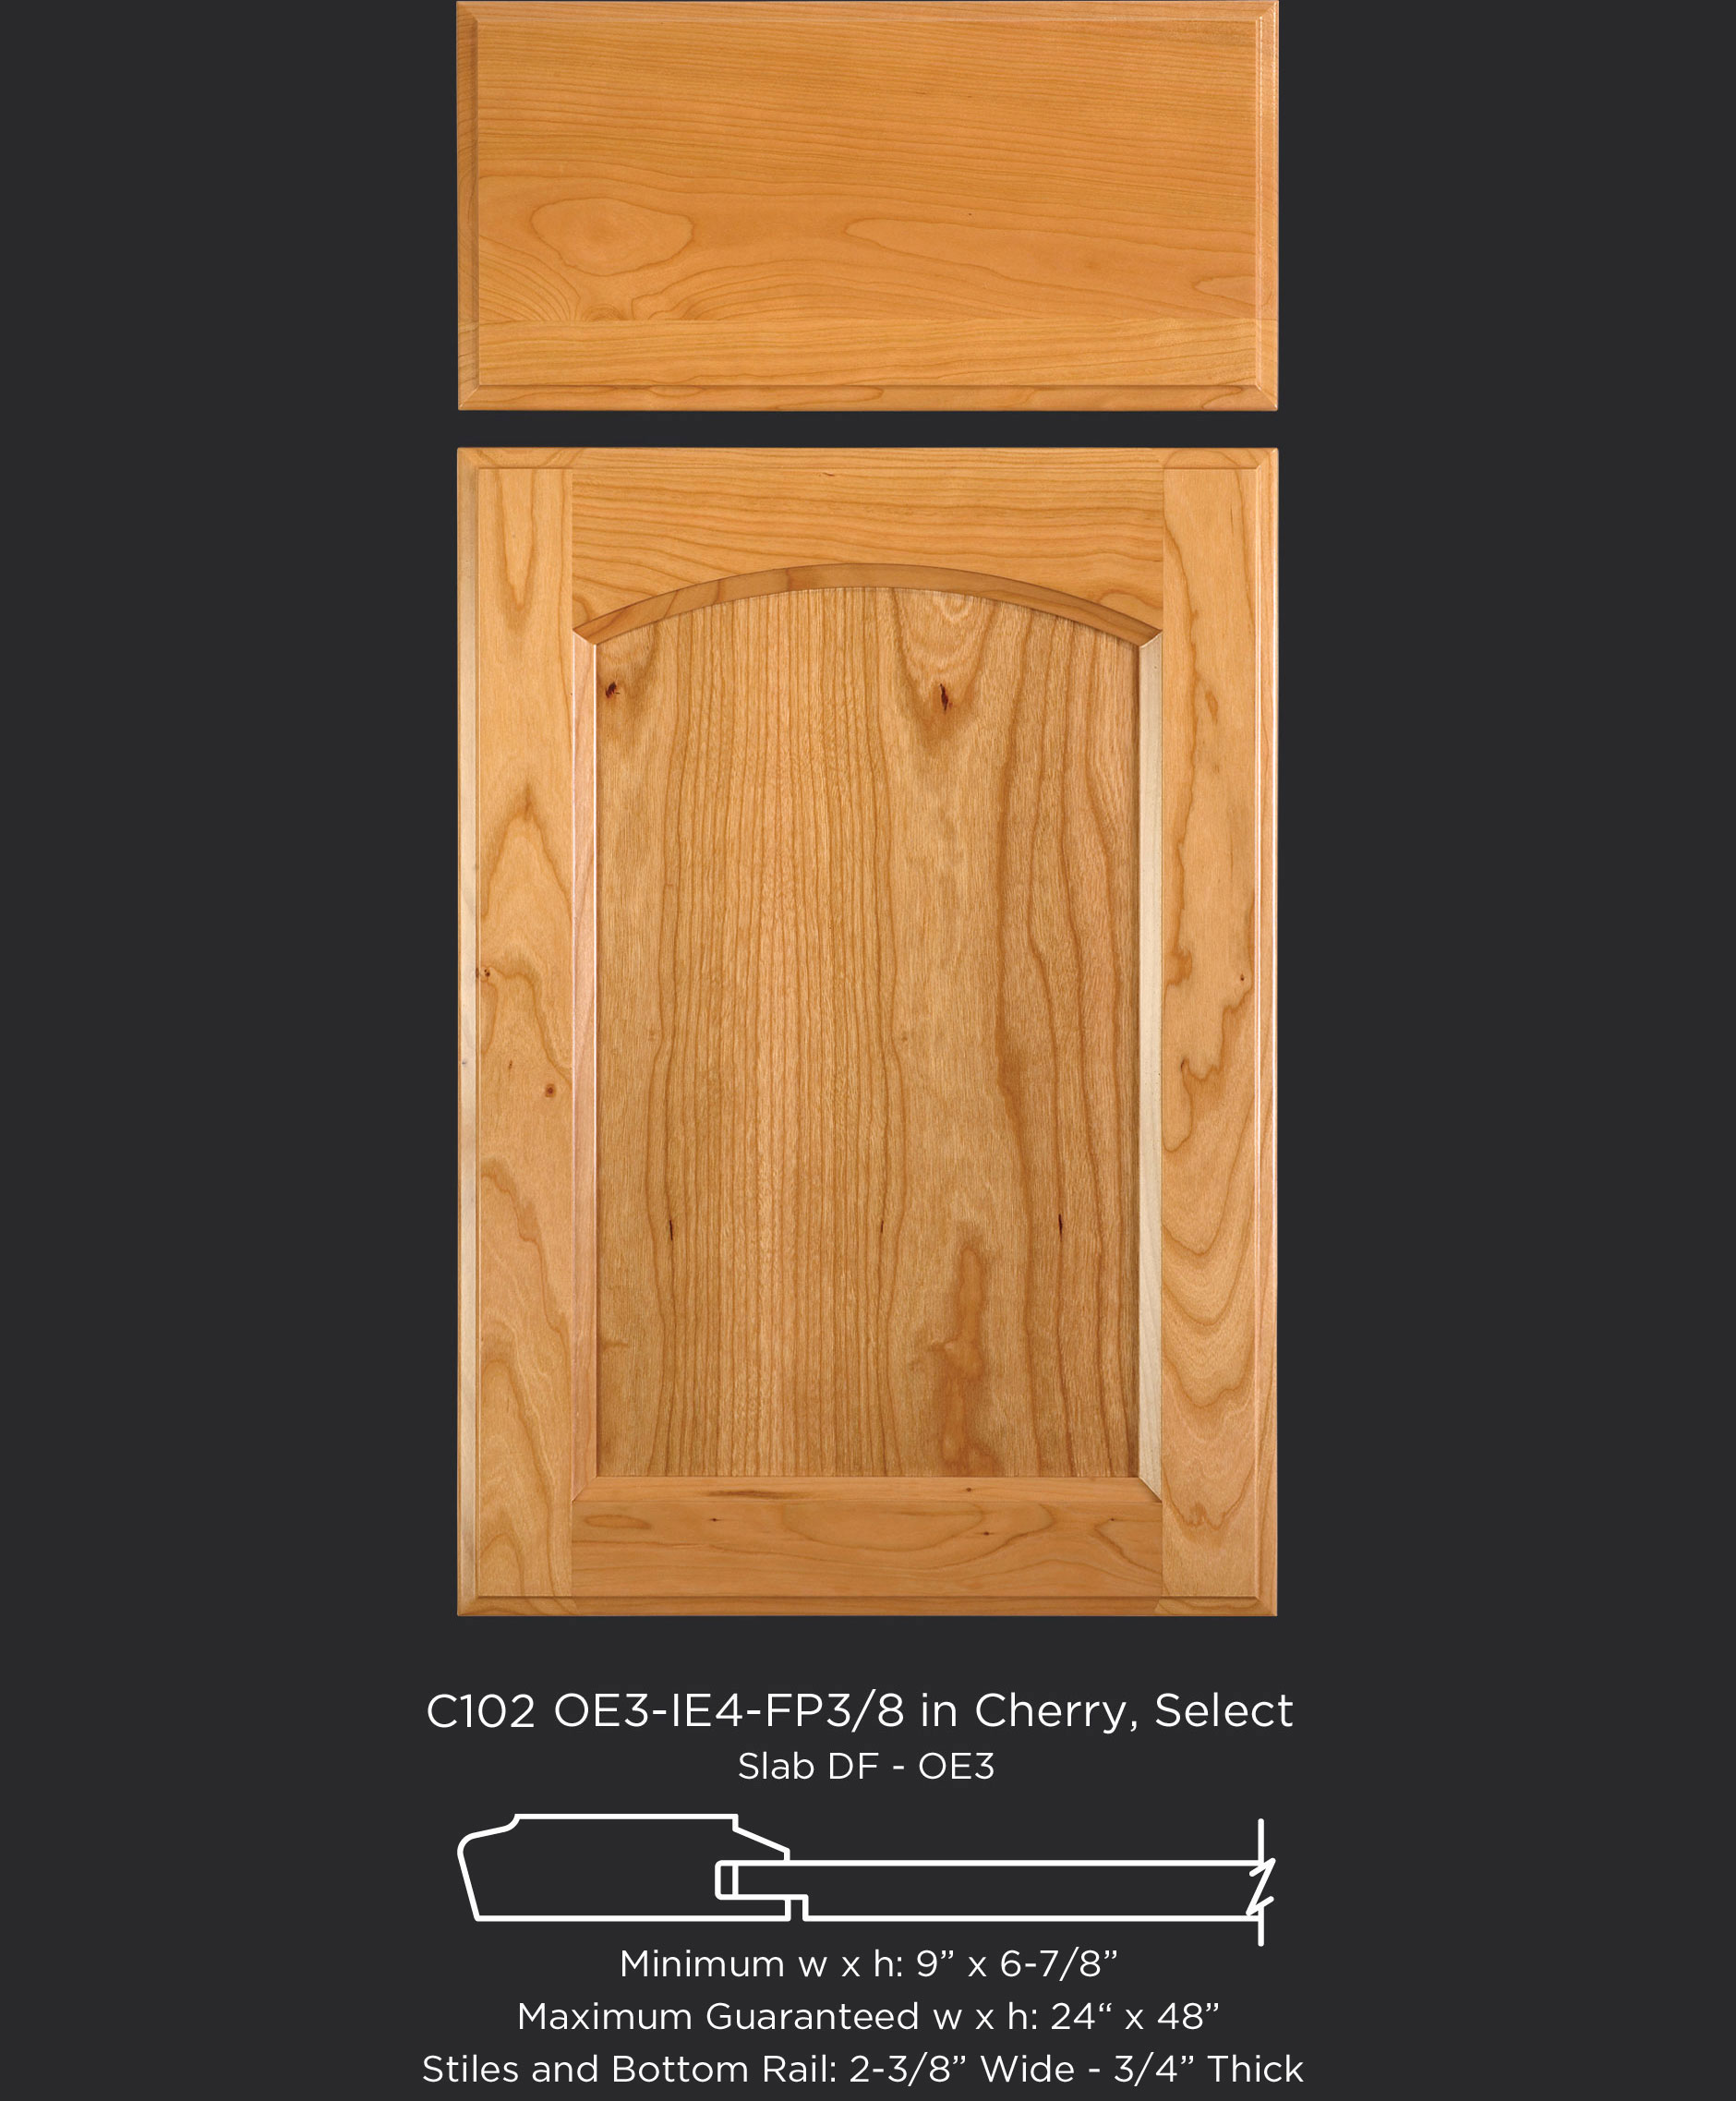 Cope and Stick Cabinet Door C102-OE3-IE4-FP3/8 in Cherry, Select and slab drawer front with OE3